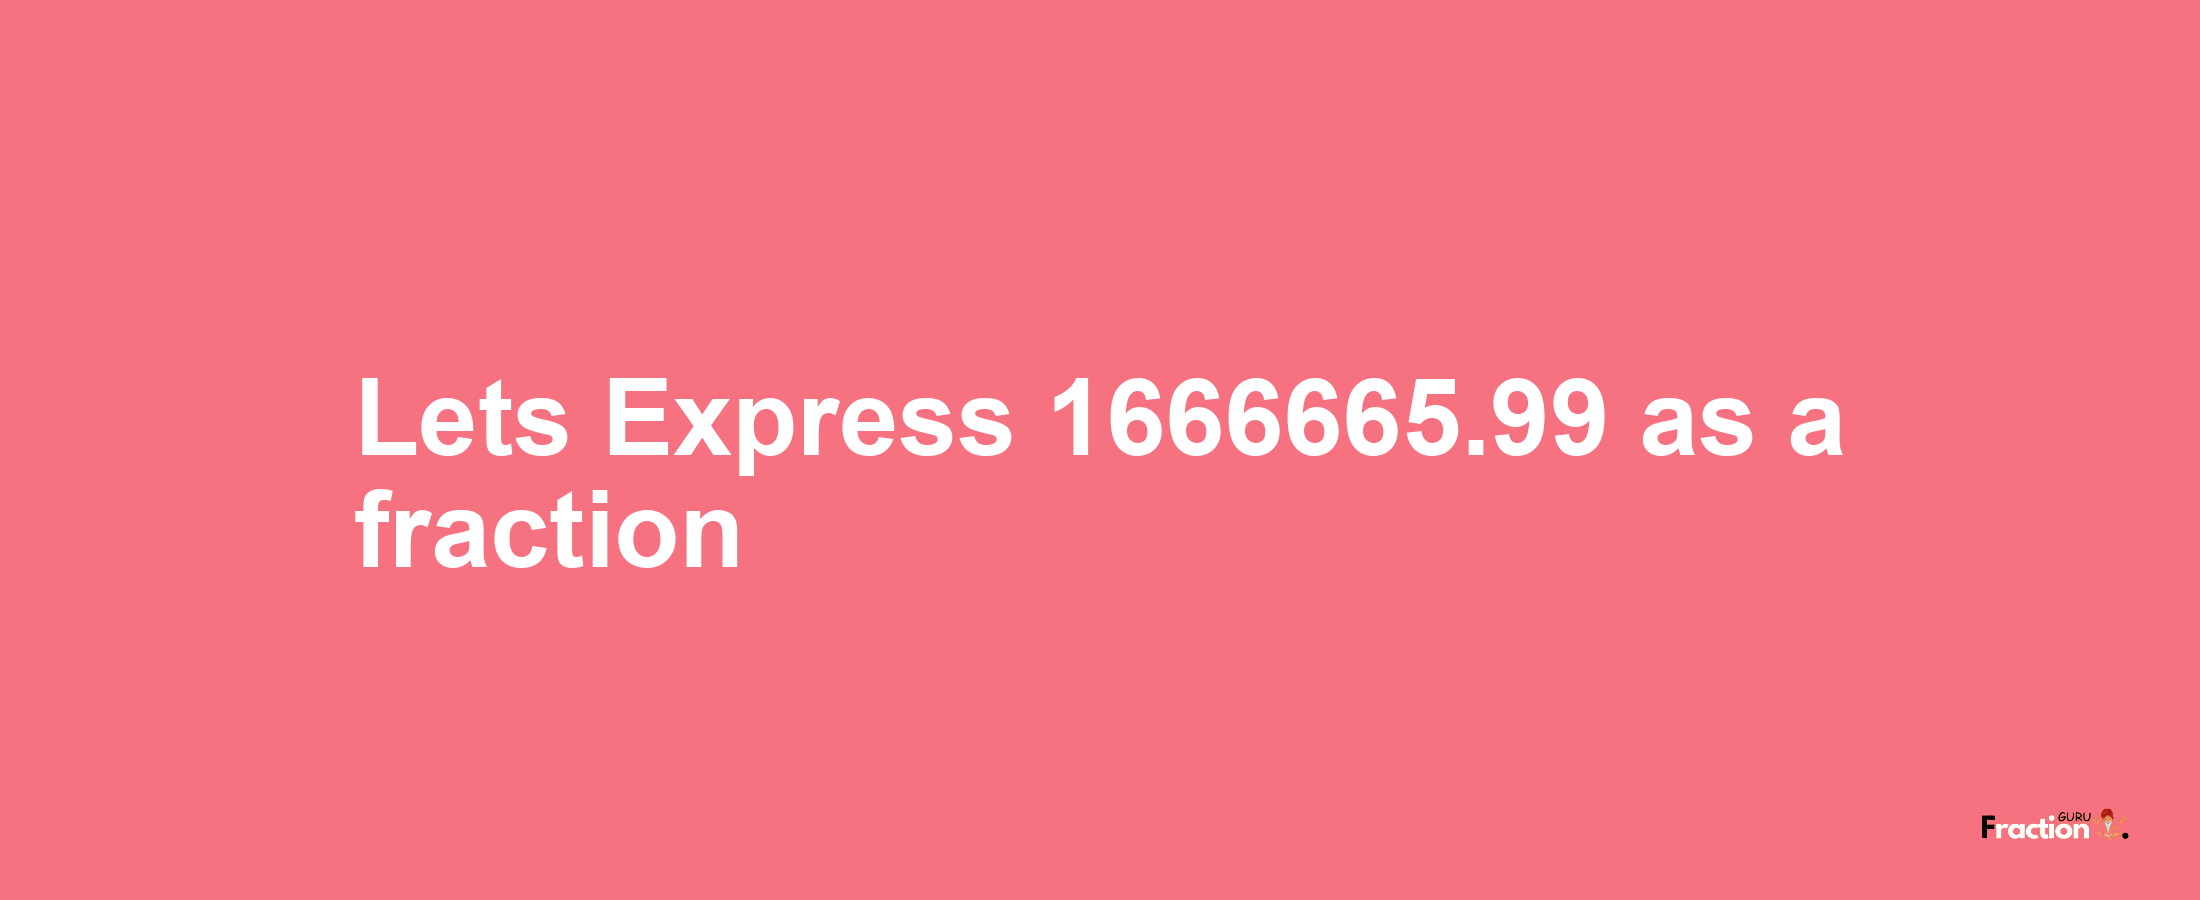 Lets Express 1666665.99 as afraction